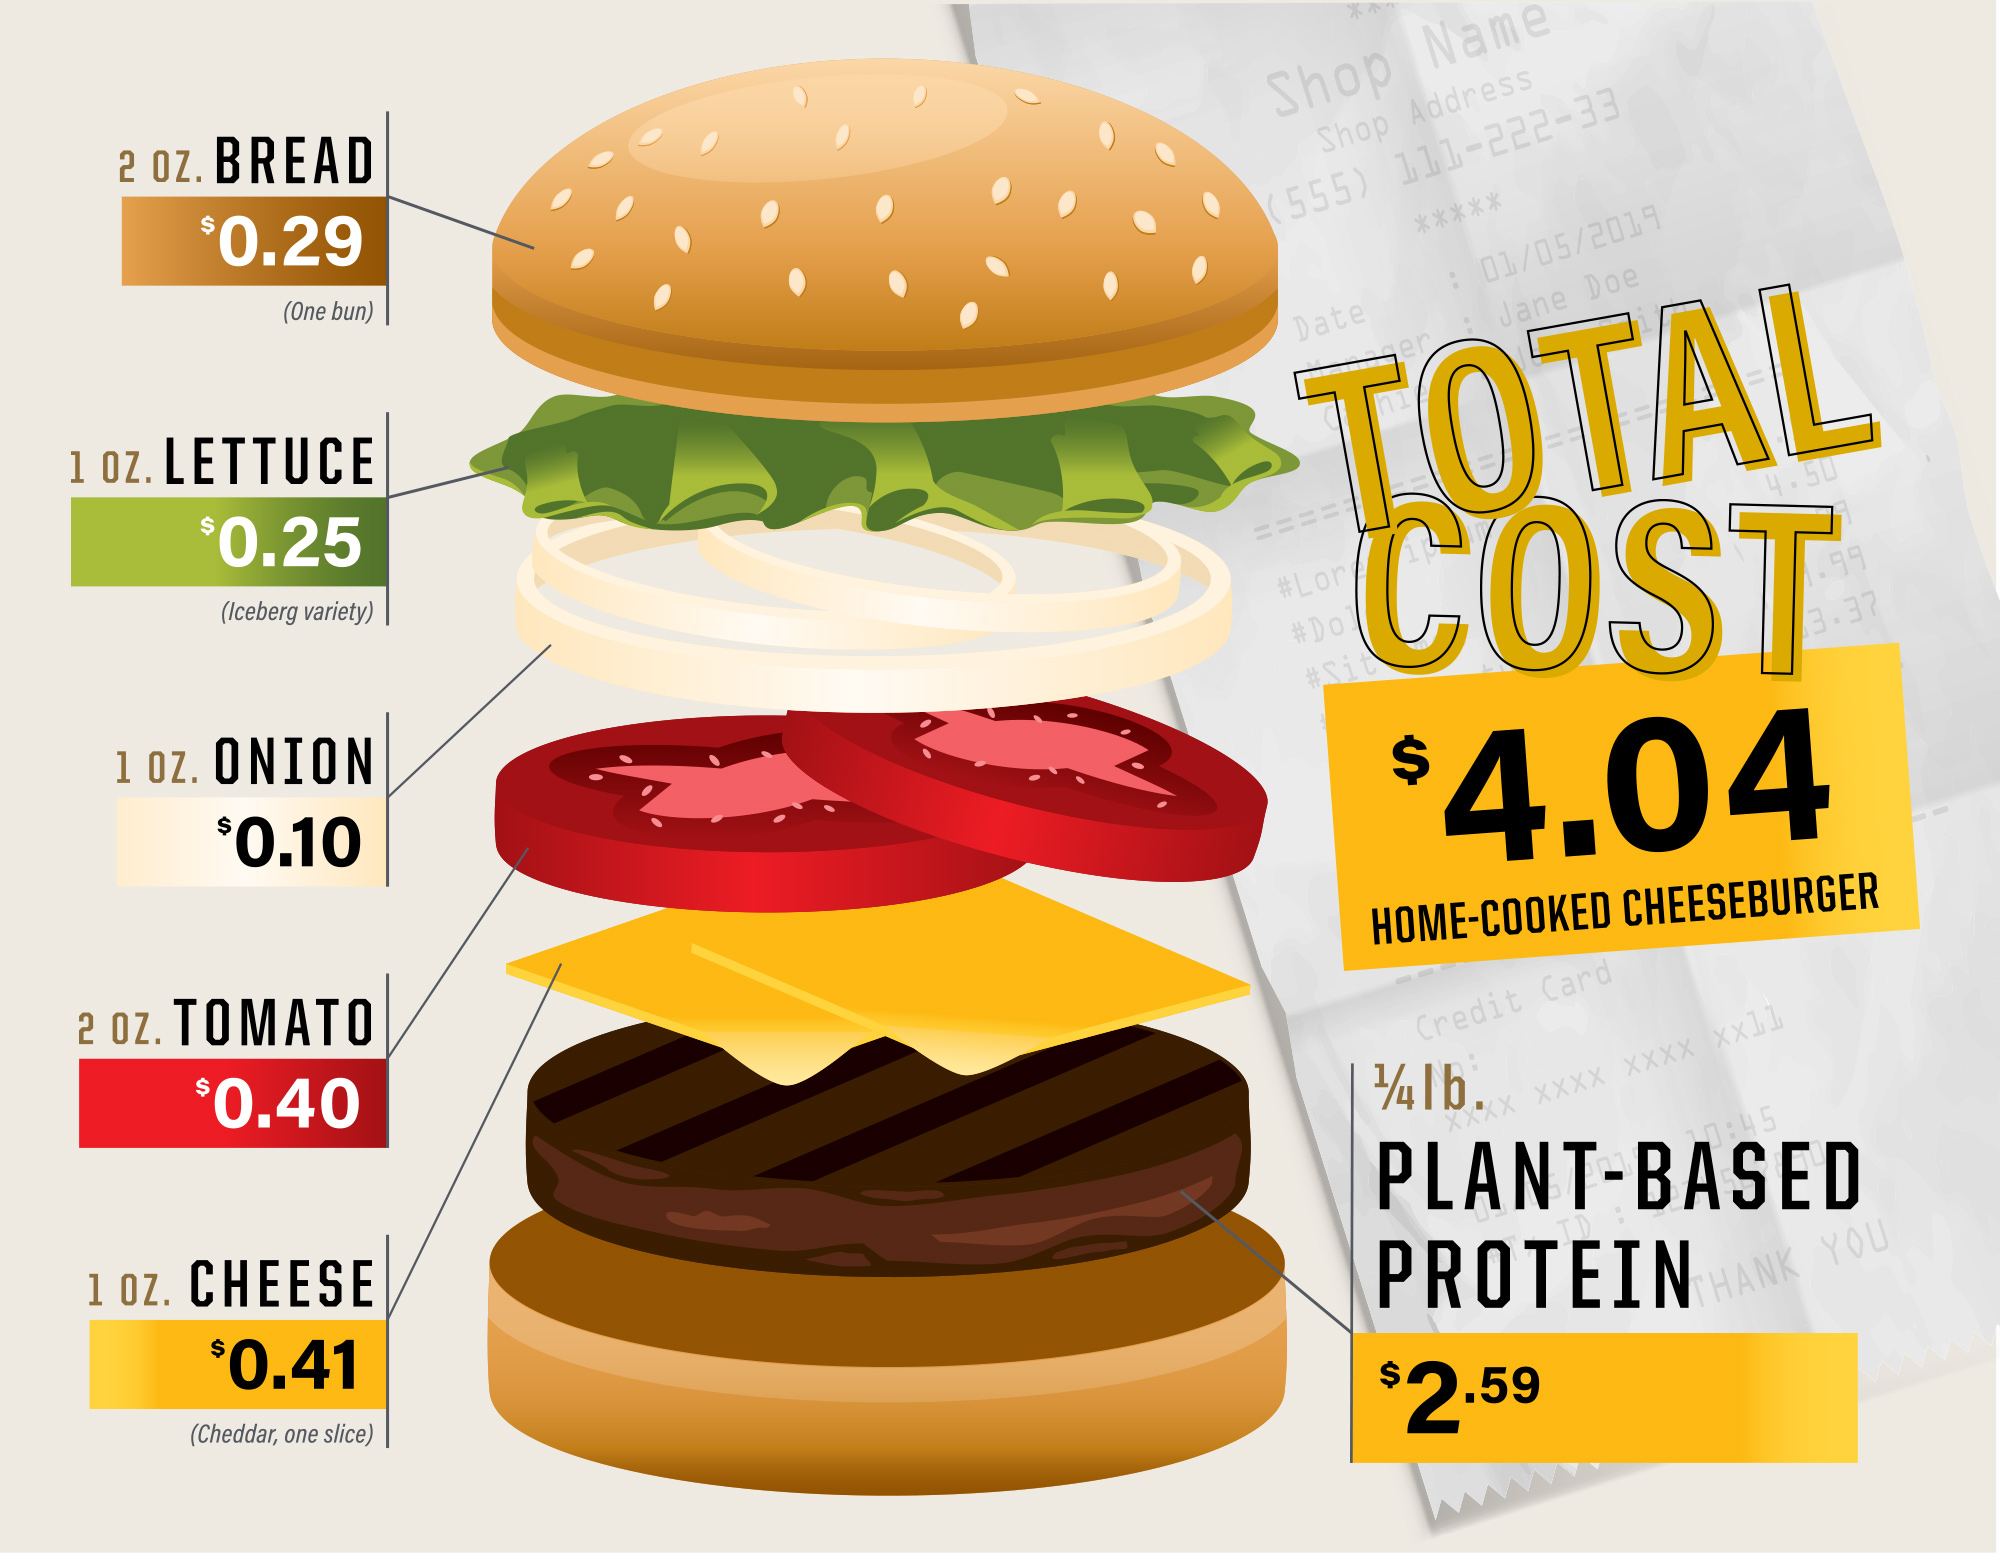 The total cost of a home-cooked burger using ¼ lb. plant-based protein, one 2 oz. bun, 1 oz. lettuce, 1 oz. onion, 2 oz. tomato and one 1 oz. slice of cheese is $4.04.